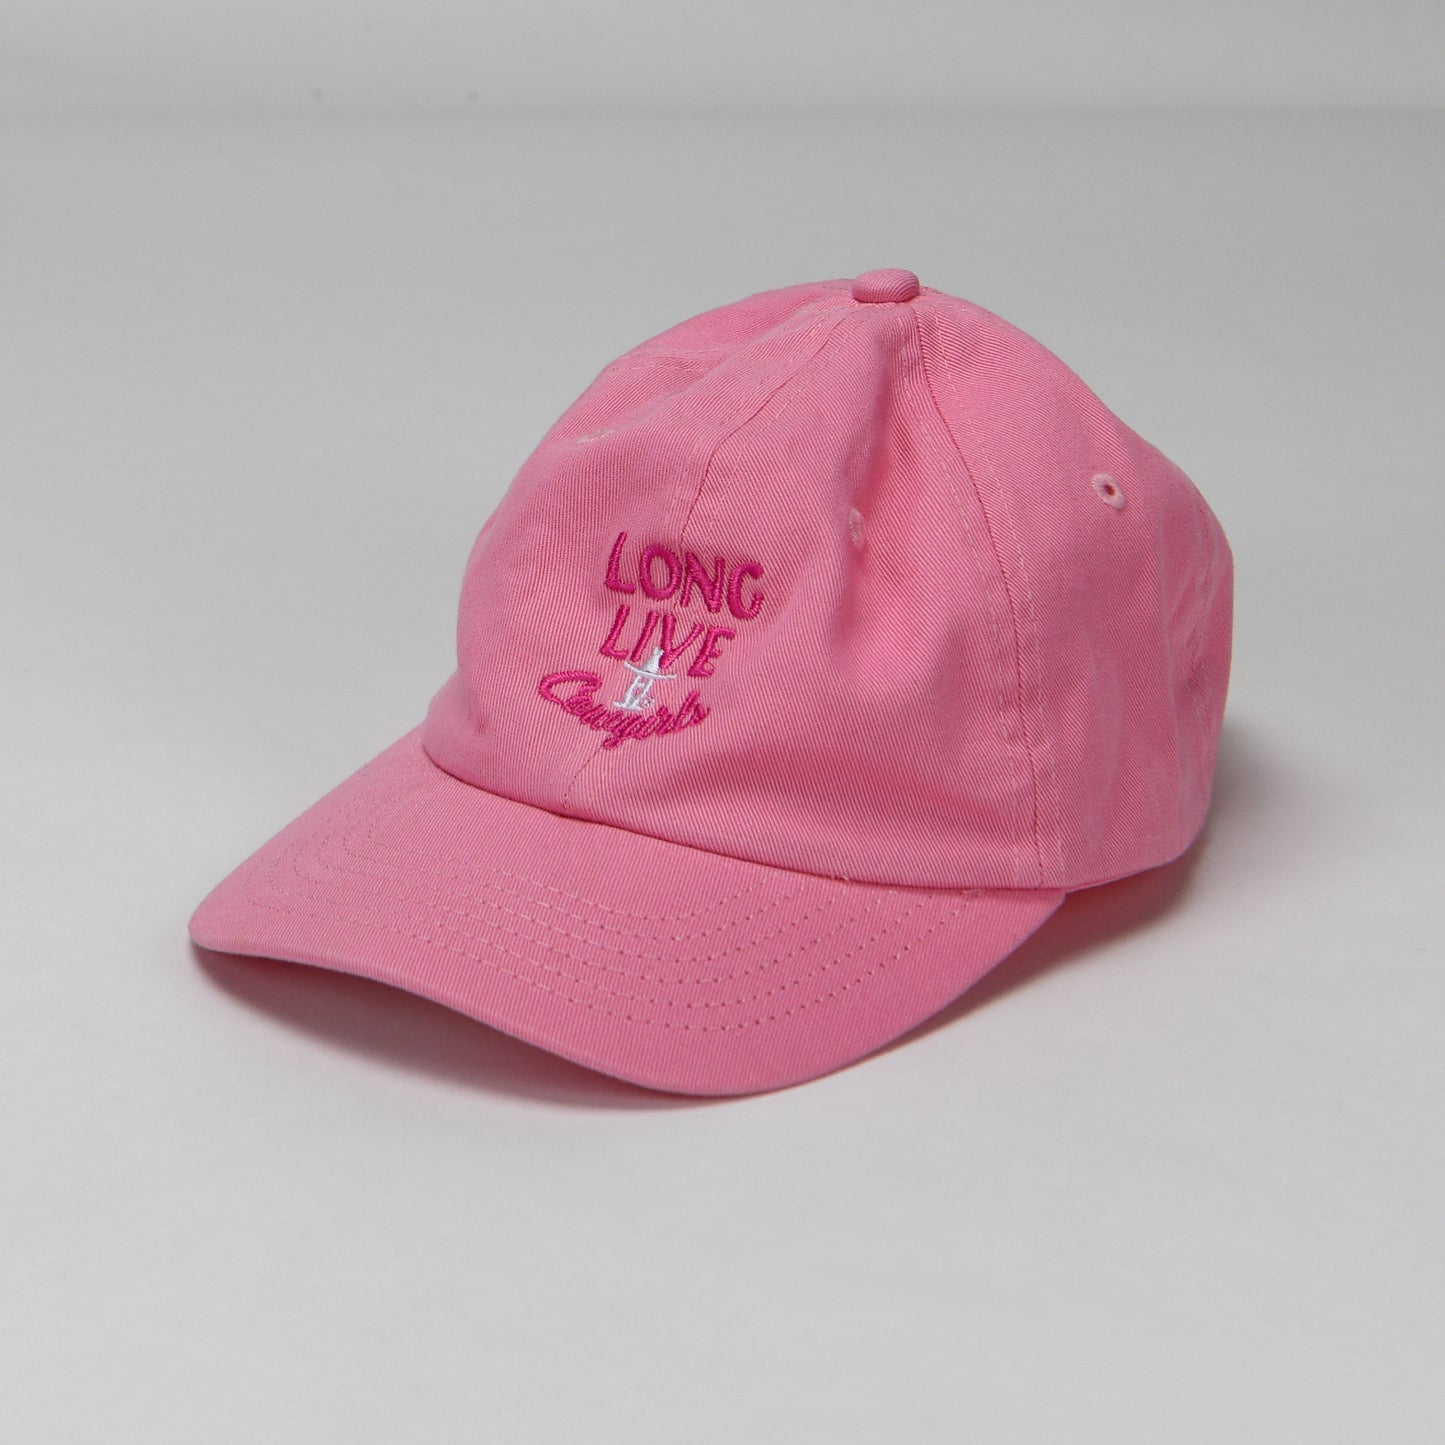 Youth Long Live Hat - Pink